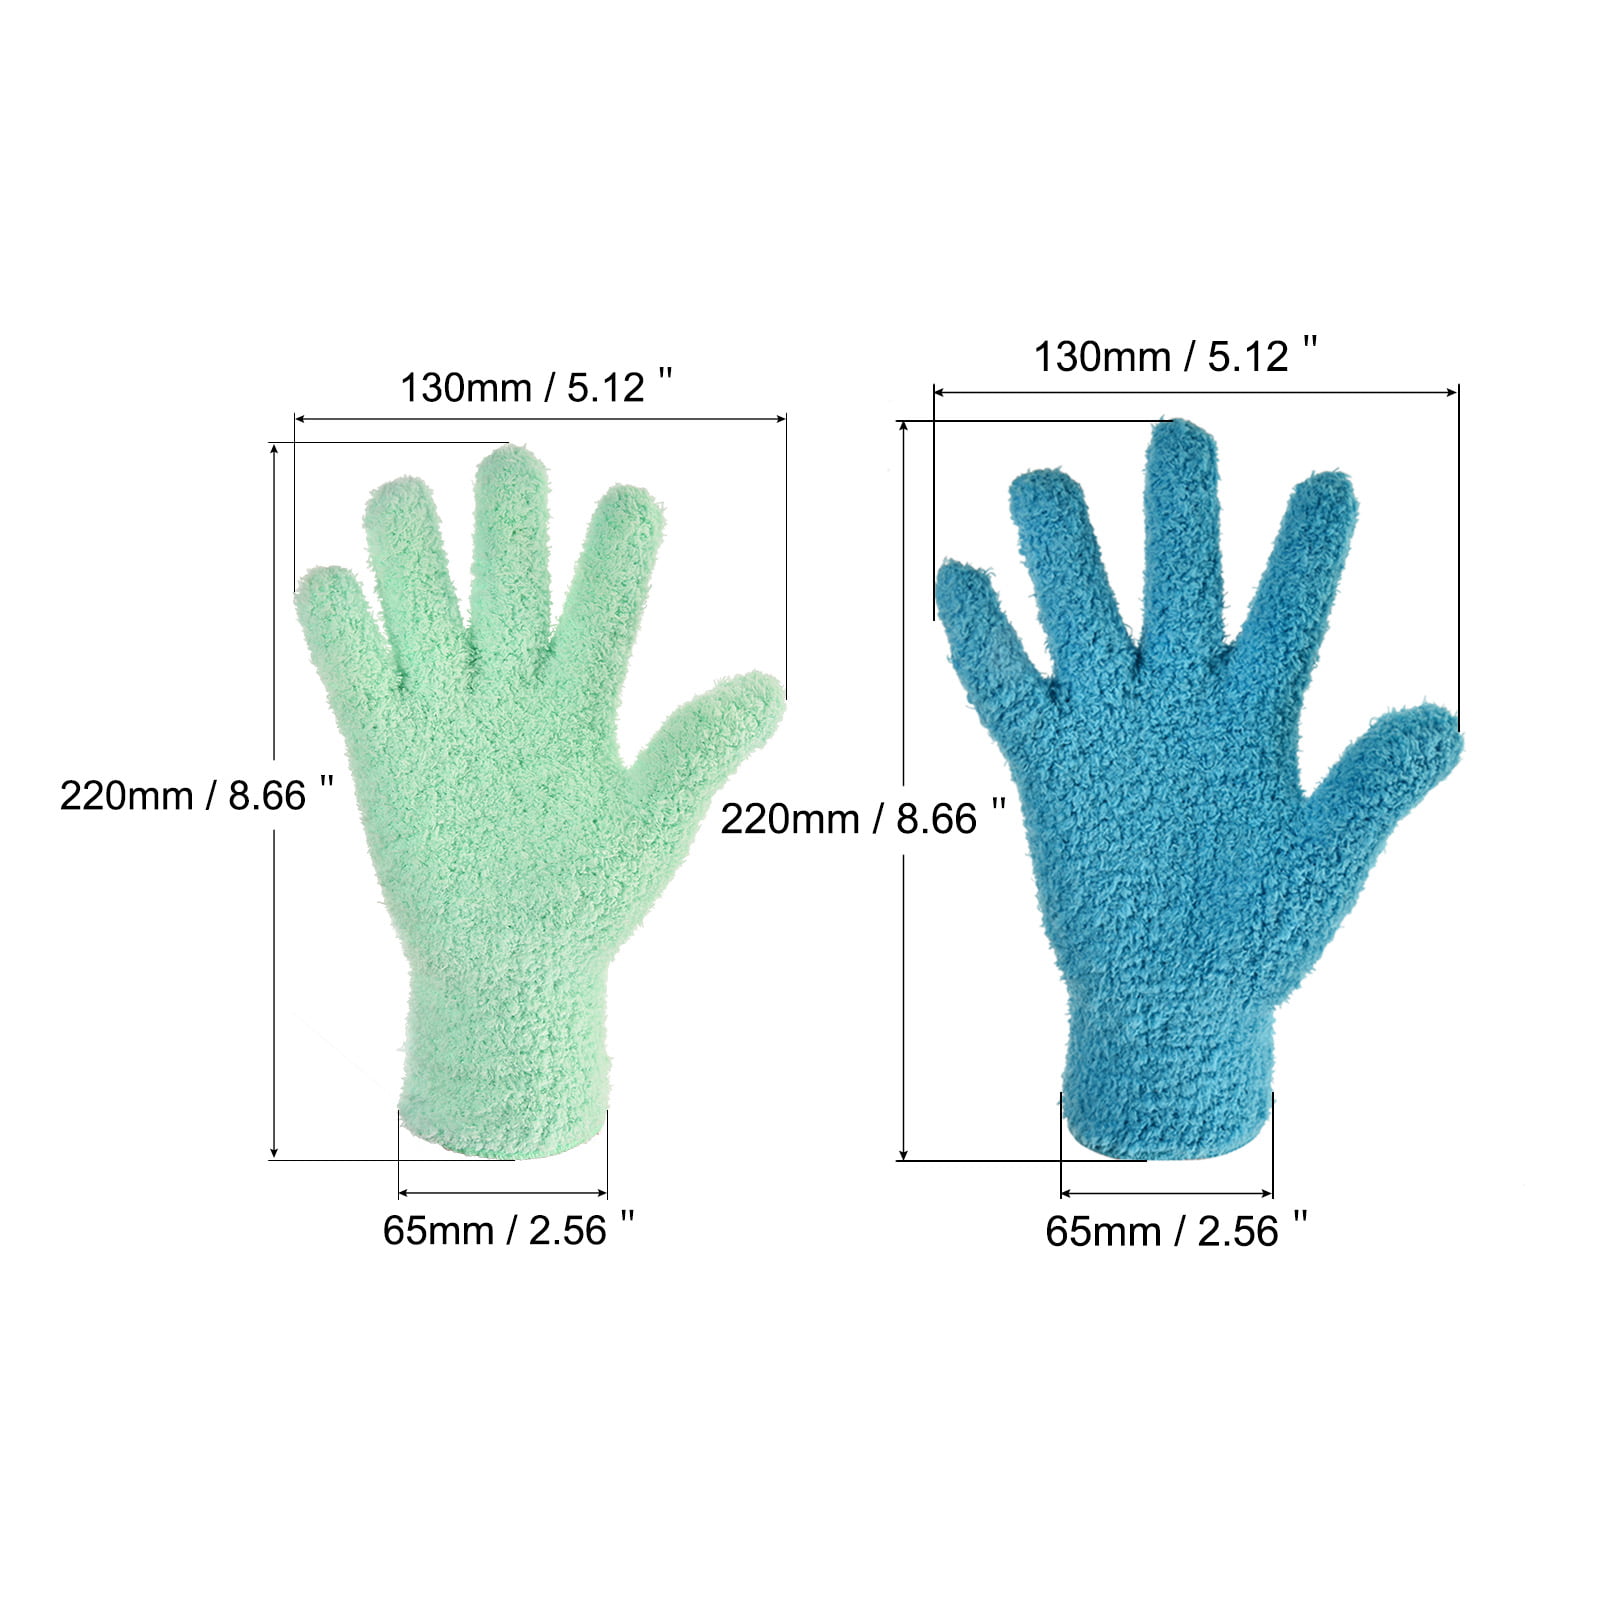 Unique Bargains Microfiber Soft Chenille Double Sided Cleaning Gloves 9.84  x 6.69 Dark Blue